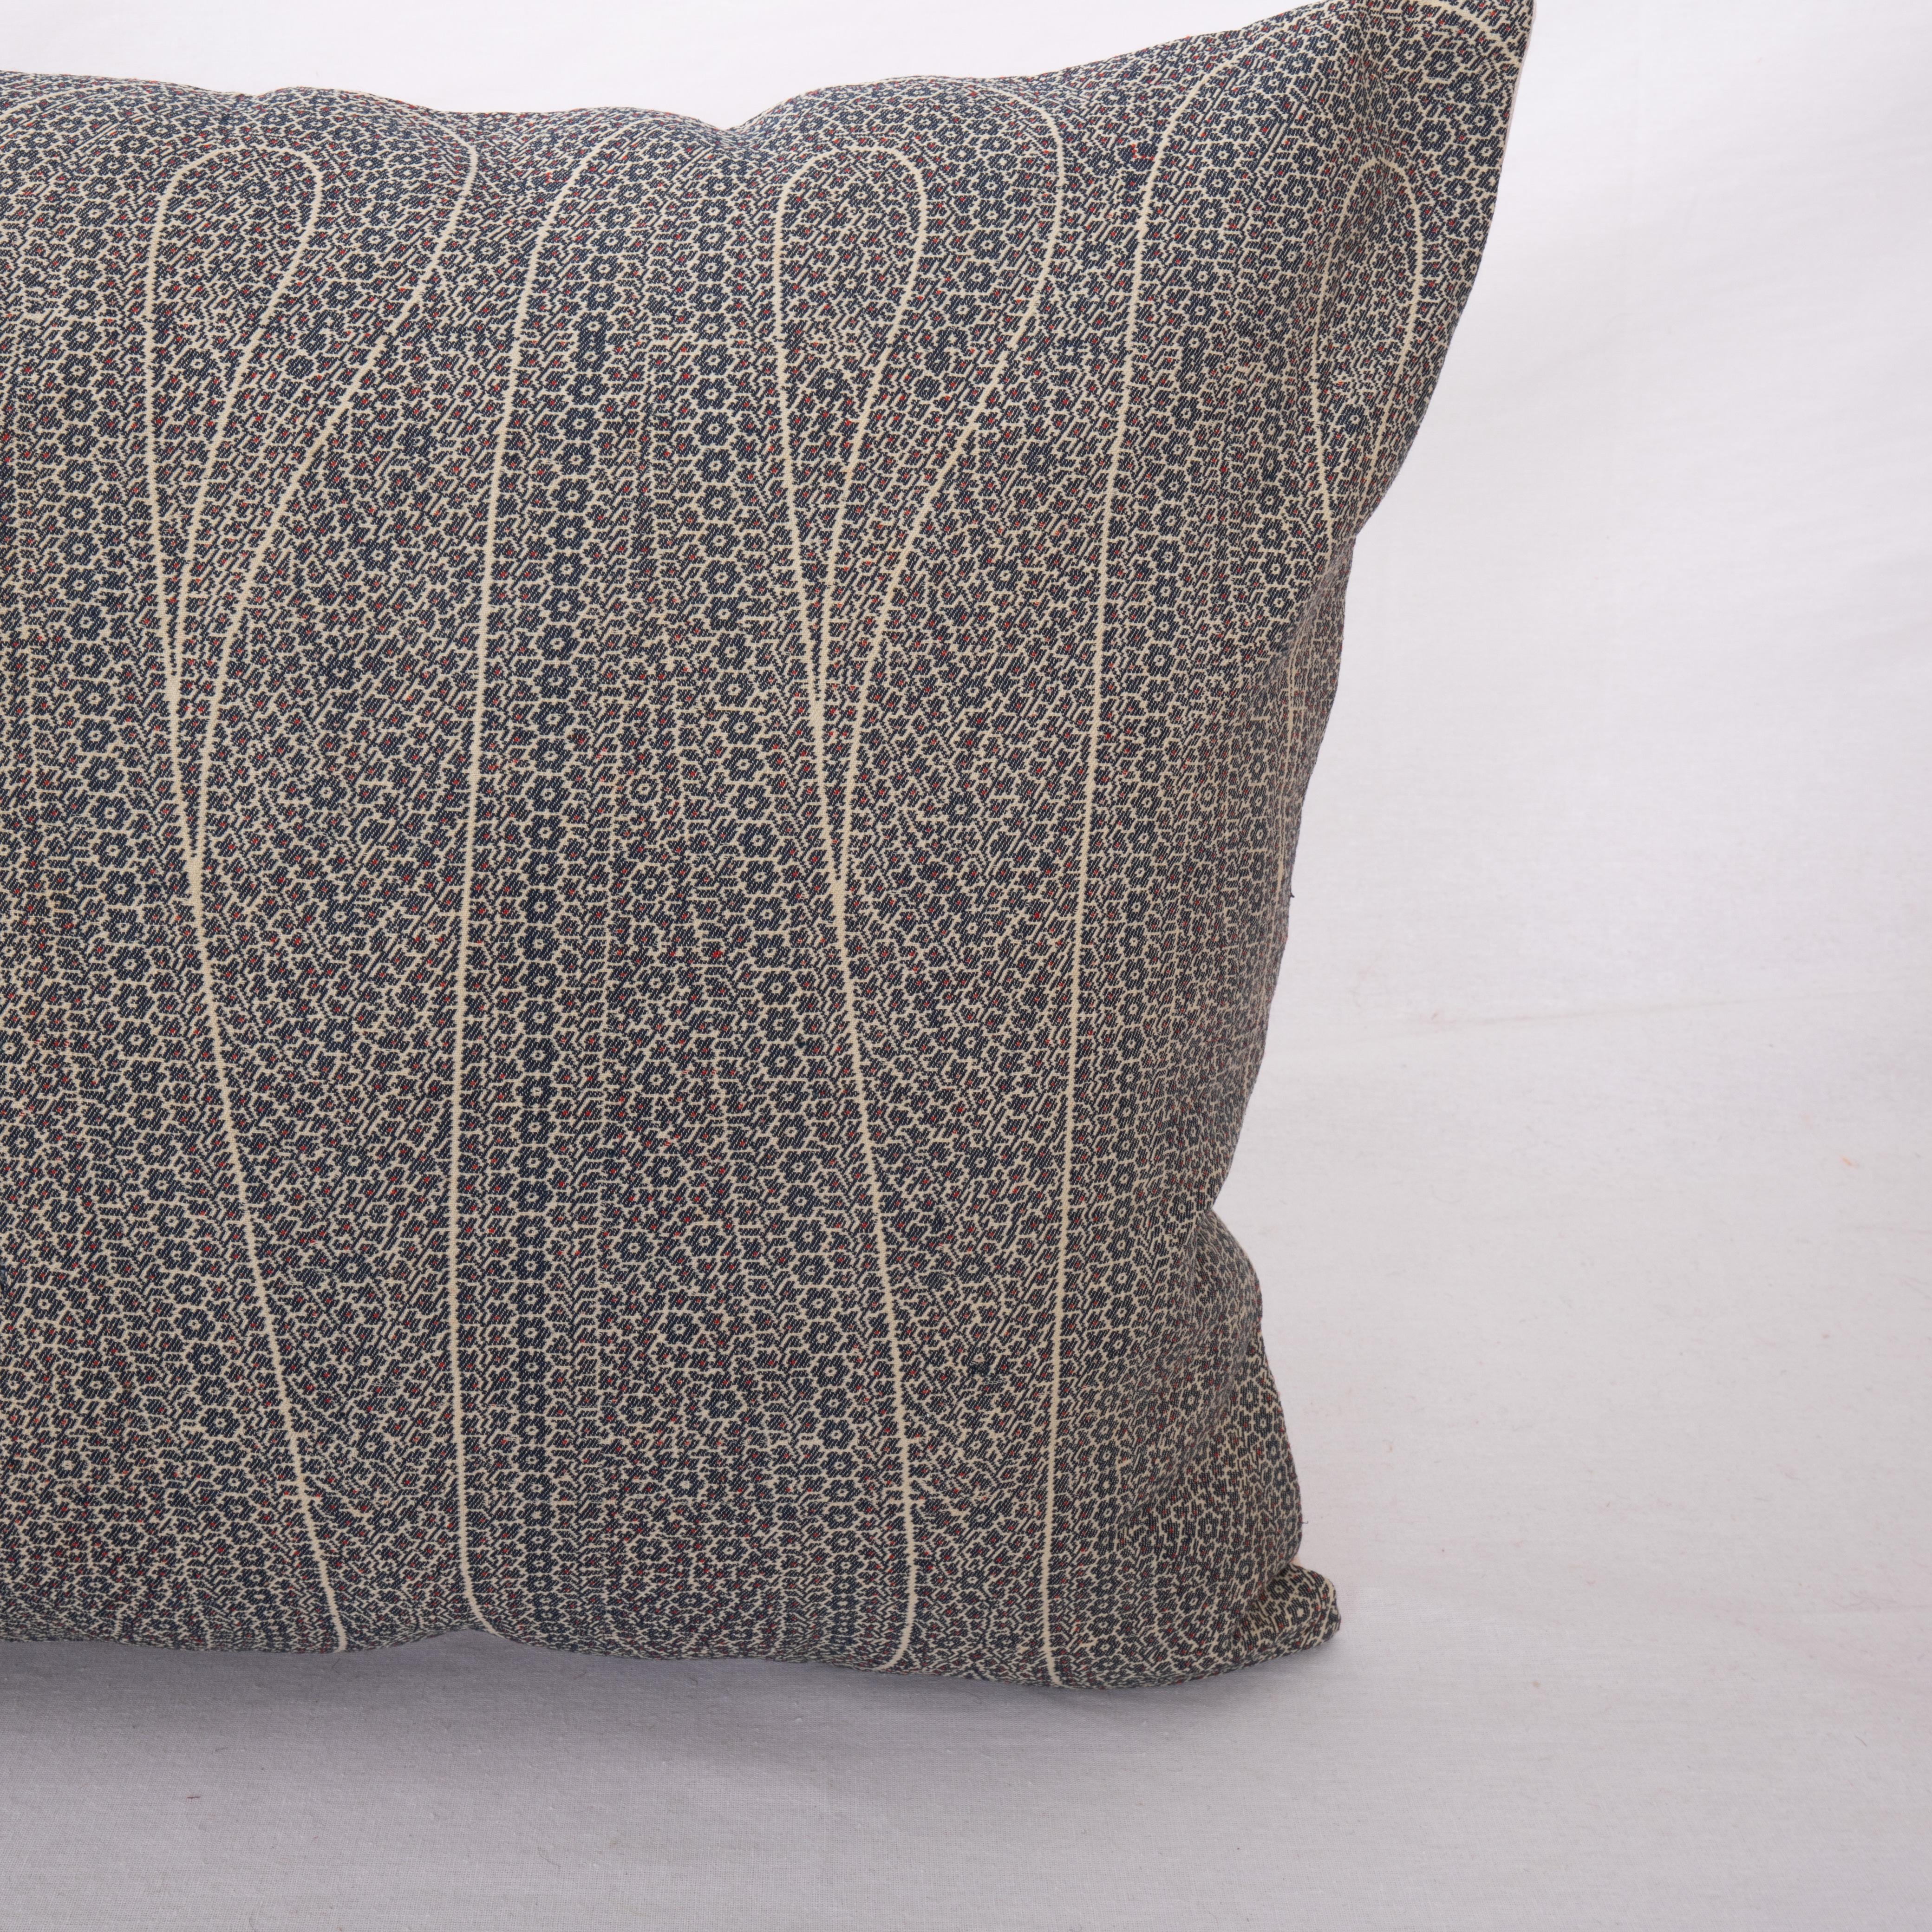 Woven Antique Pillow Cover made from a European Wool Paisley Shawl, L 19th/ E.20th For Sale